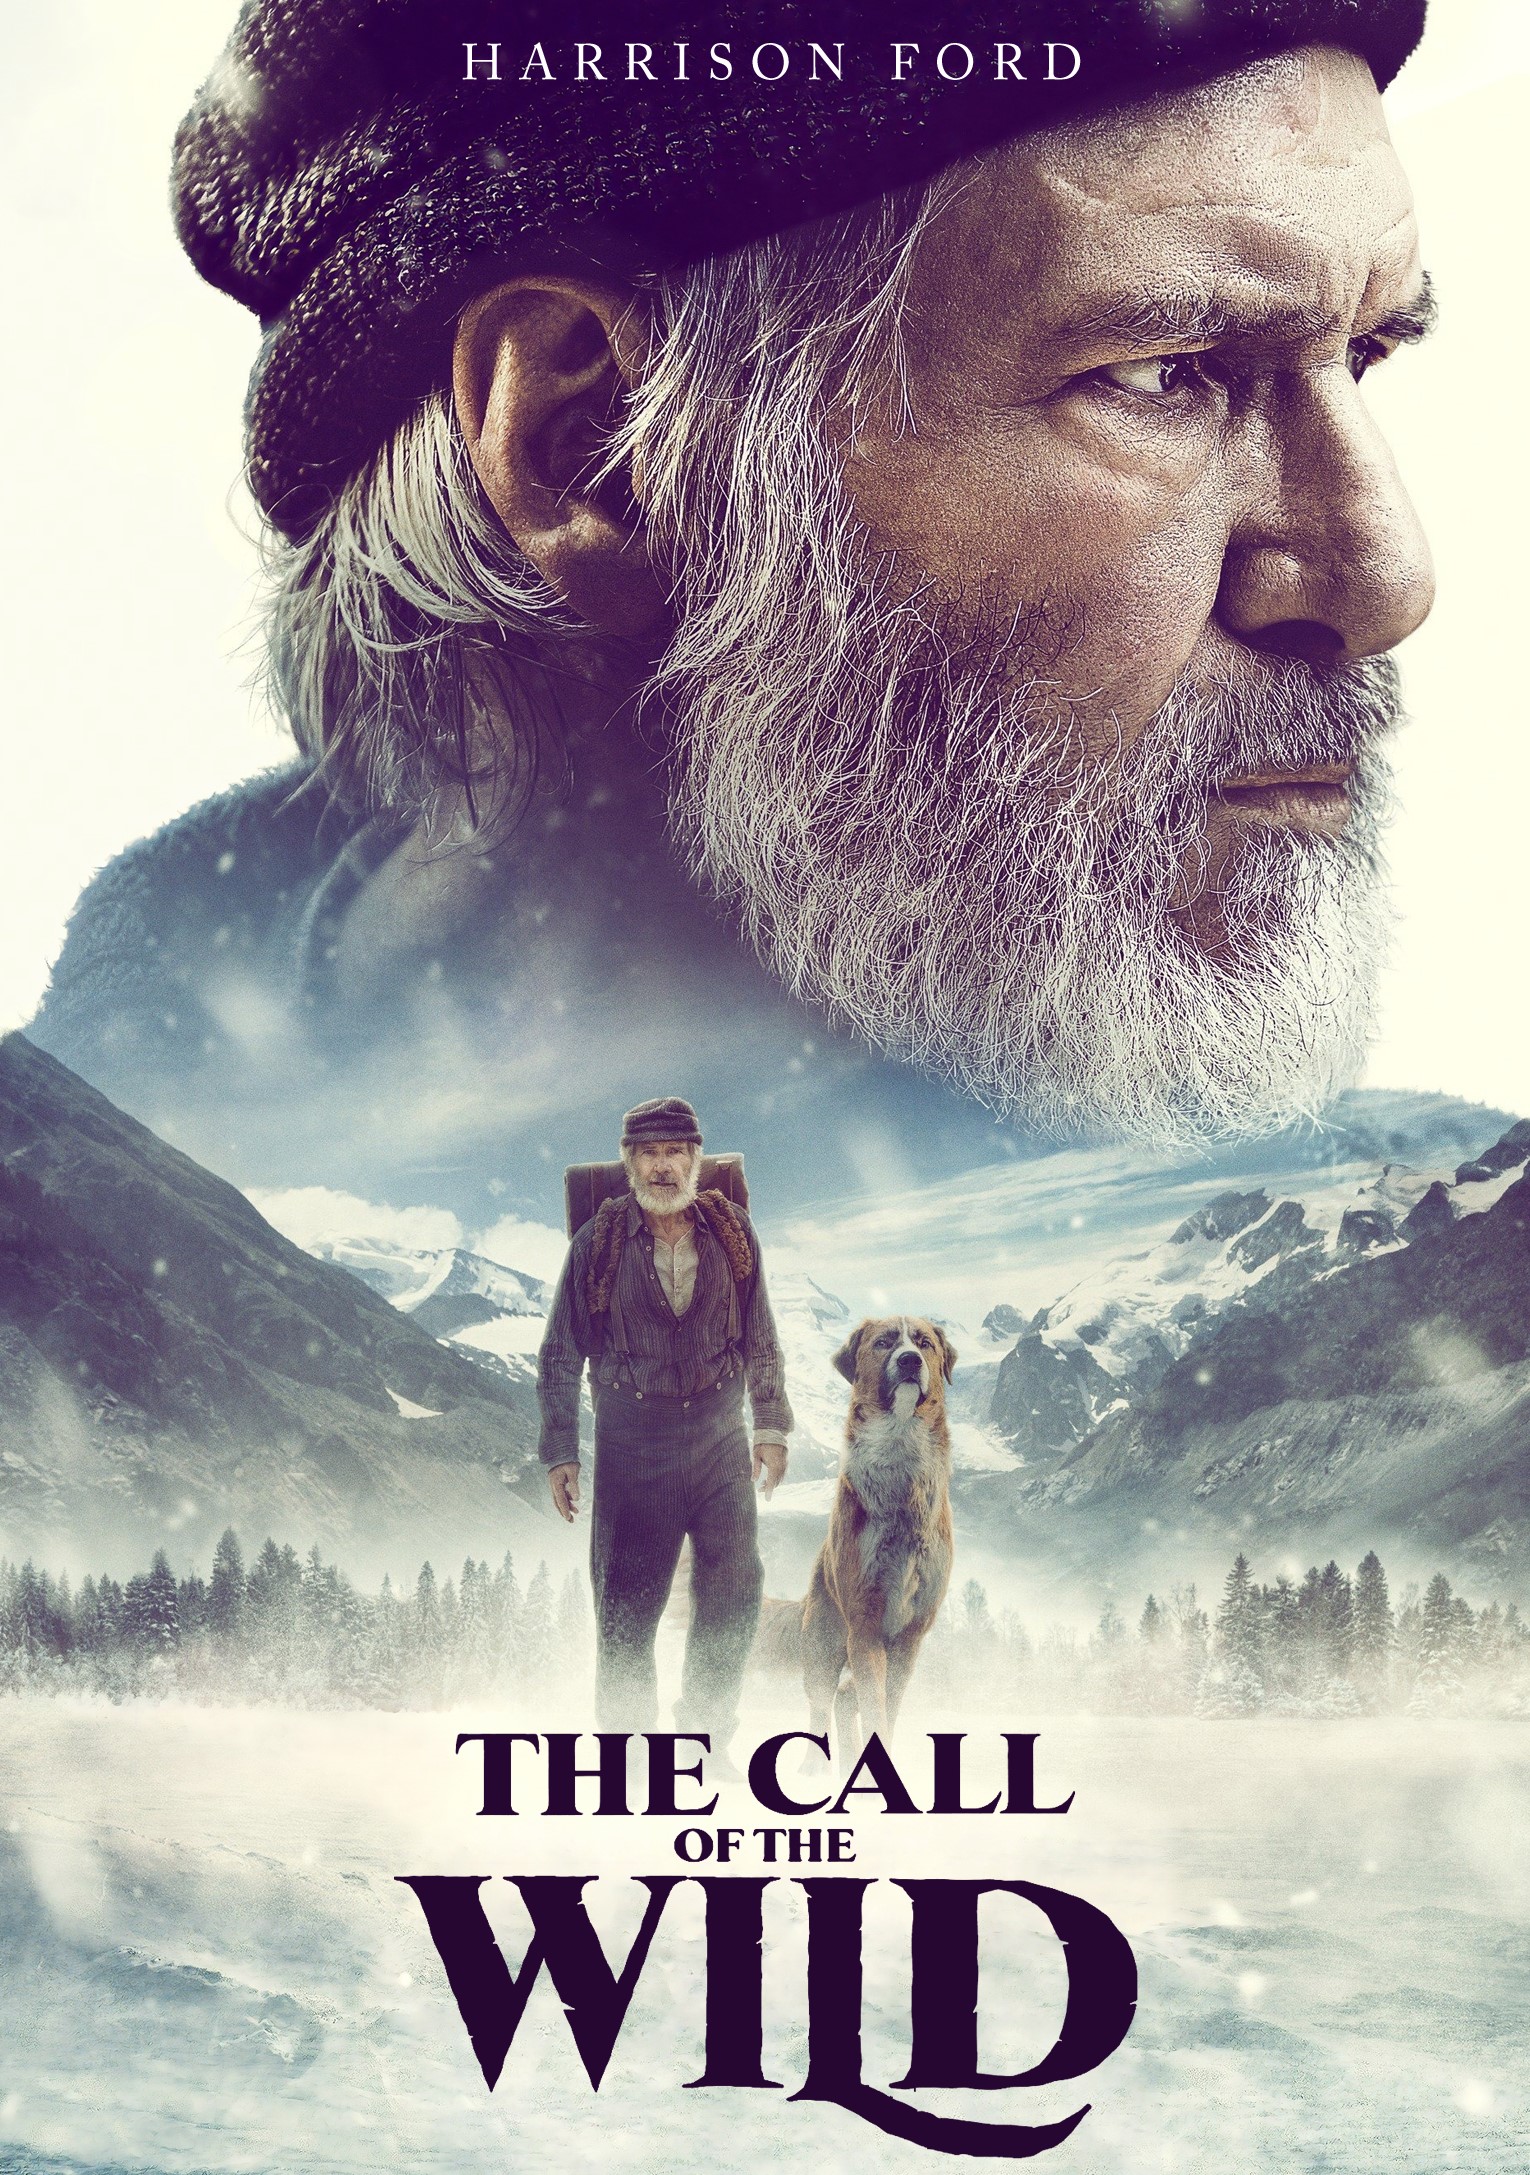 The Call of the Wild 2020 DVD cover.